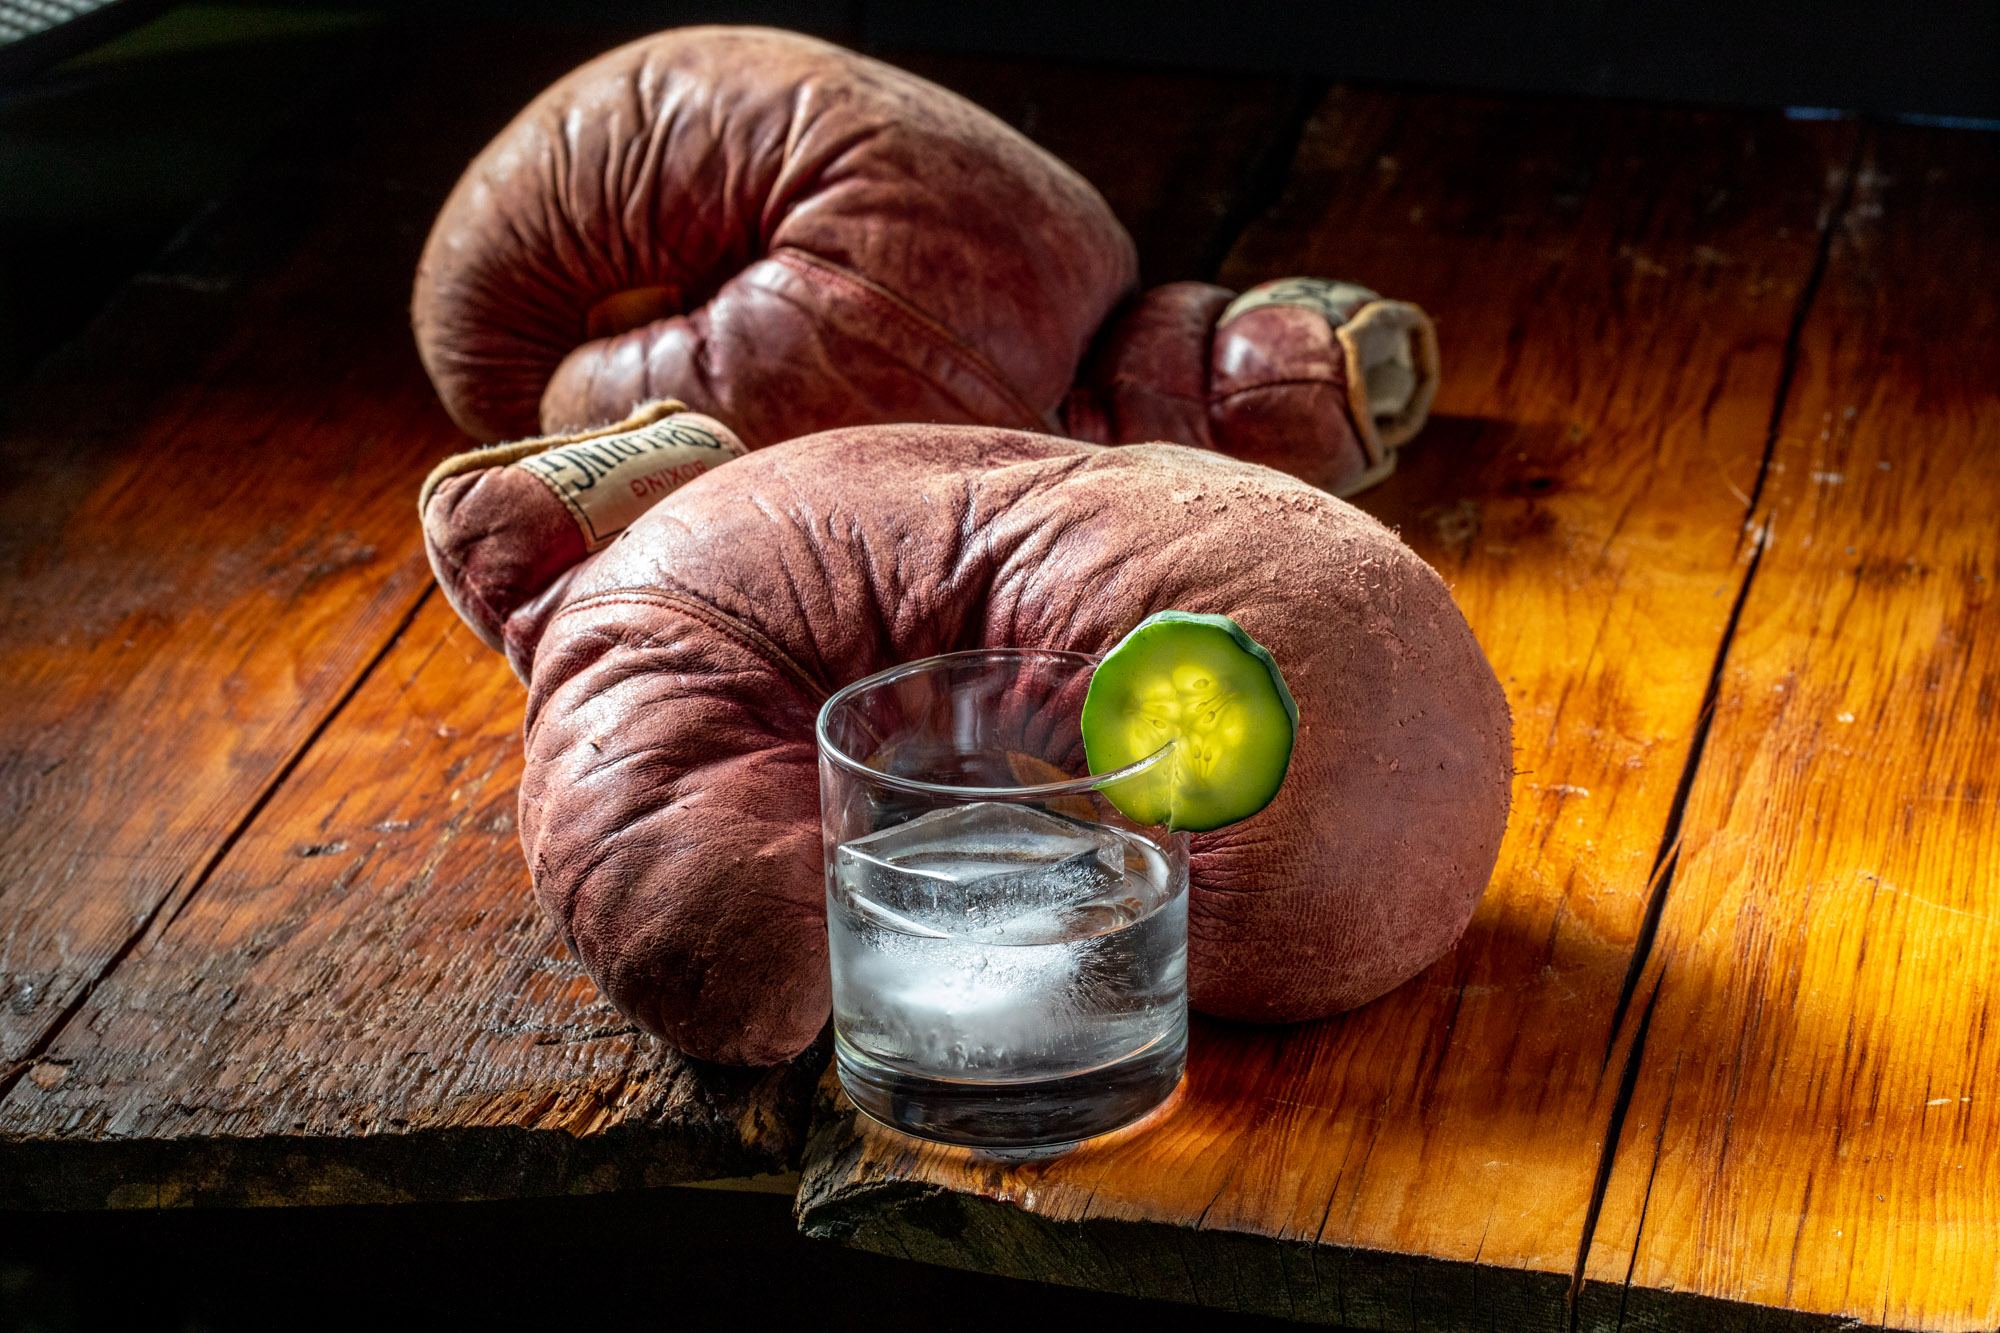 Old timey boxing gloves with an old timey cucumber cocktail nestled in them